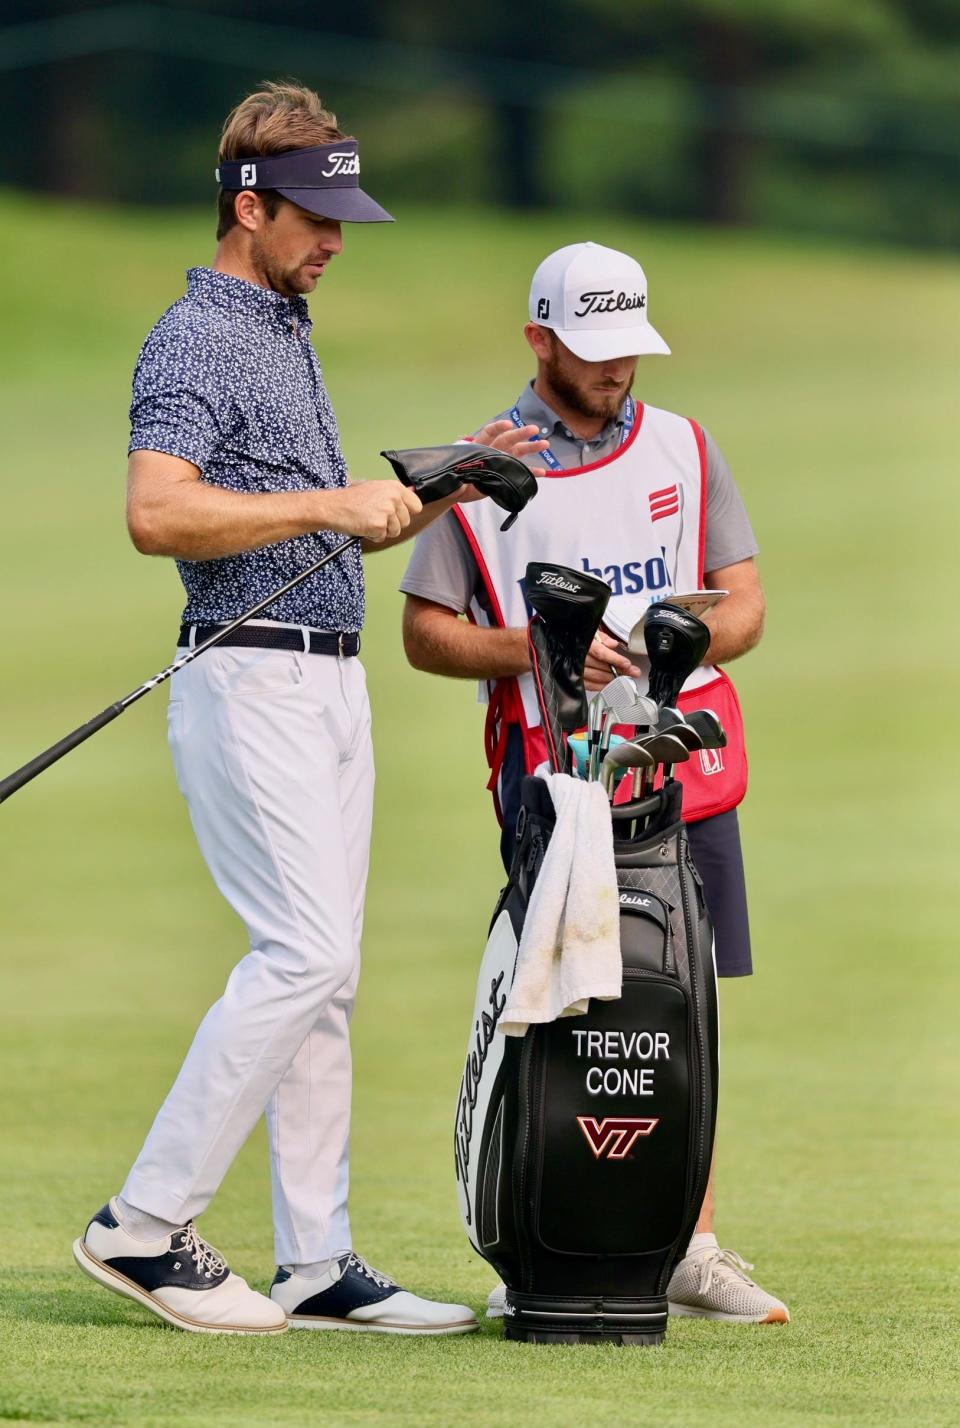 Former St. John's golfer Dan Woodbury, right, helps his former college teammate Trevor Cone, left, prepare for Cone’s second shot on the 11th hole last Sunday in the Barbasol Championship.